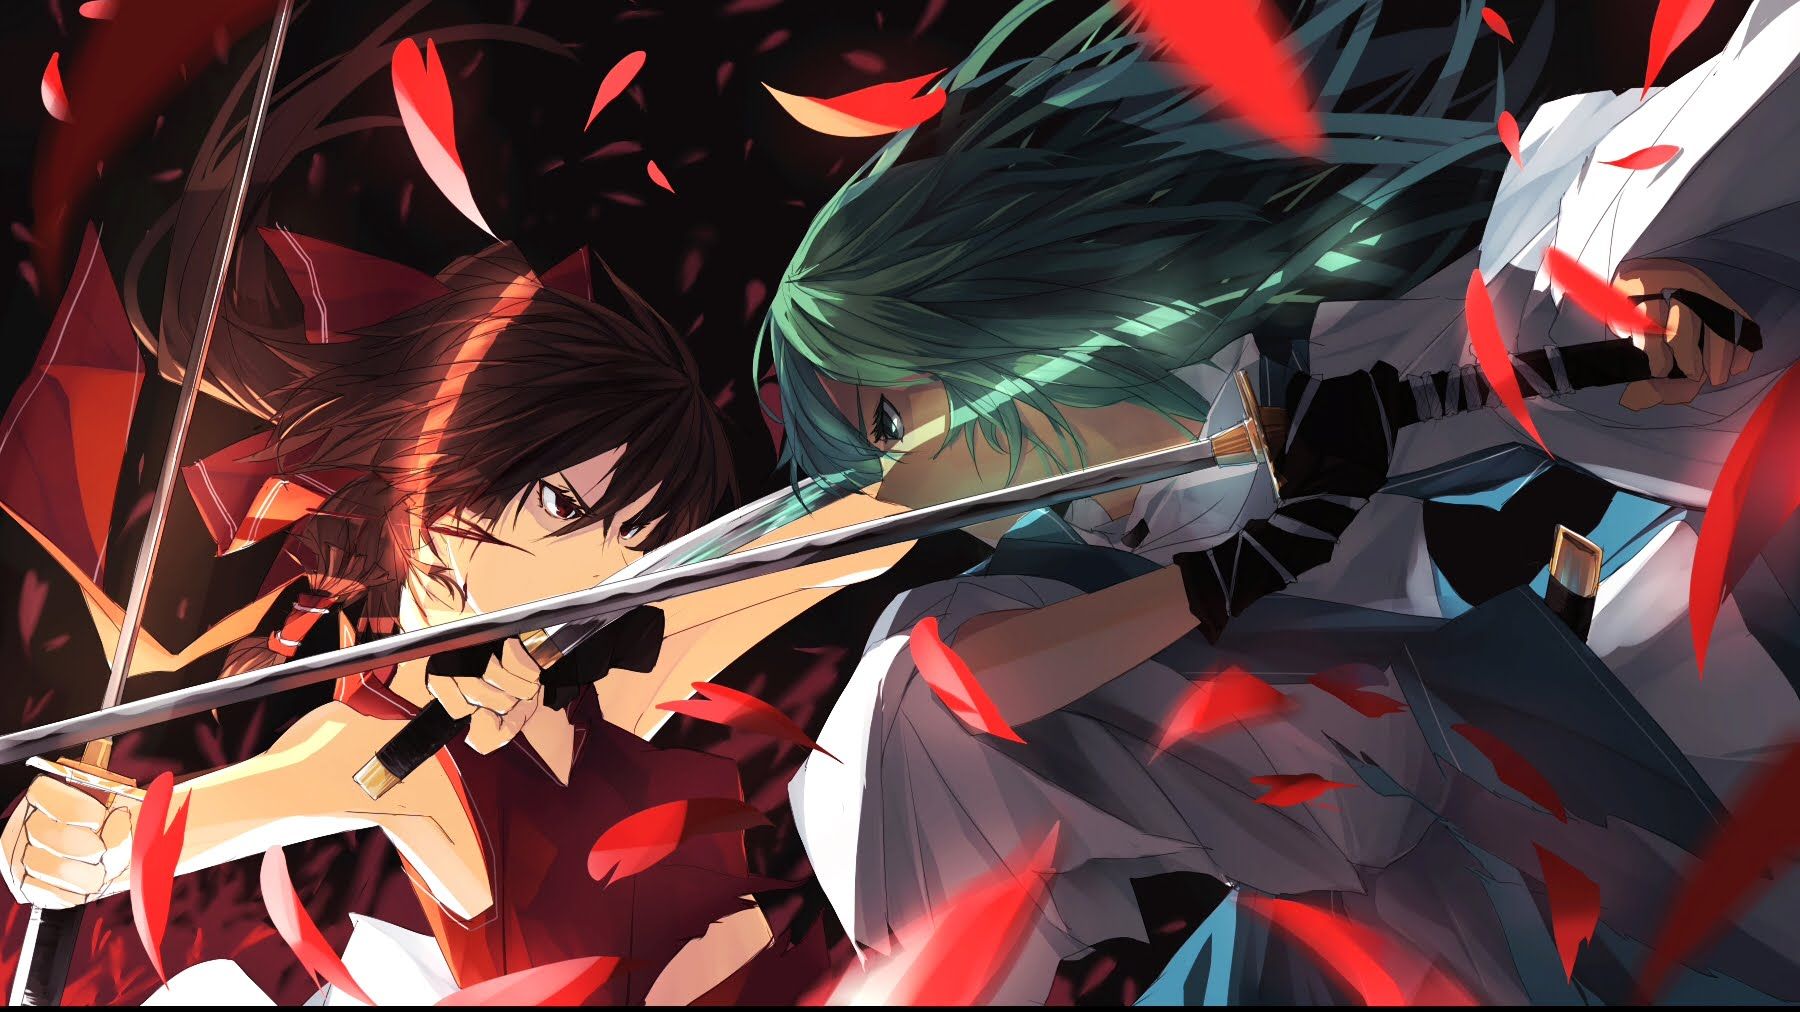 Anime Fight Art Wallpapers - Wallpaper Cave